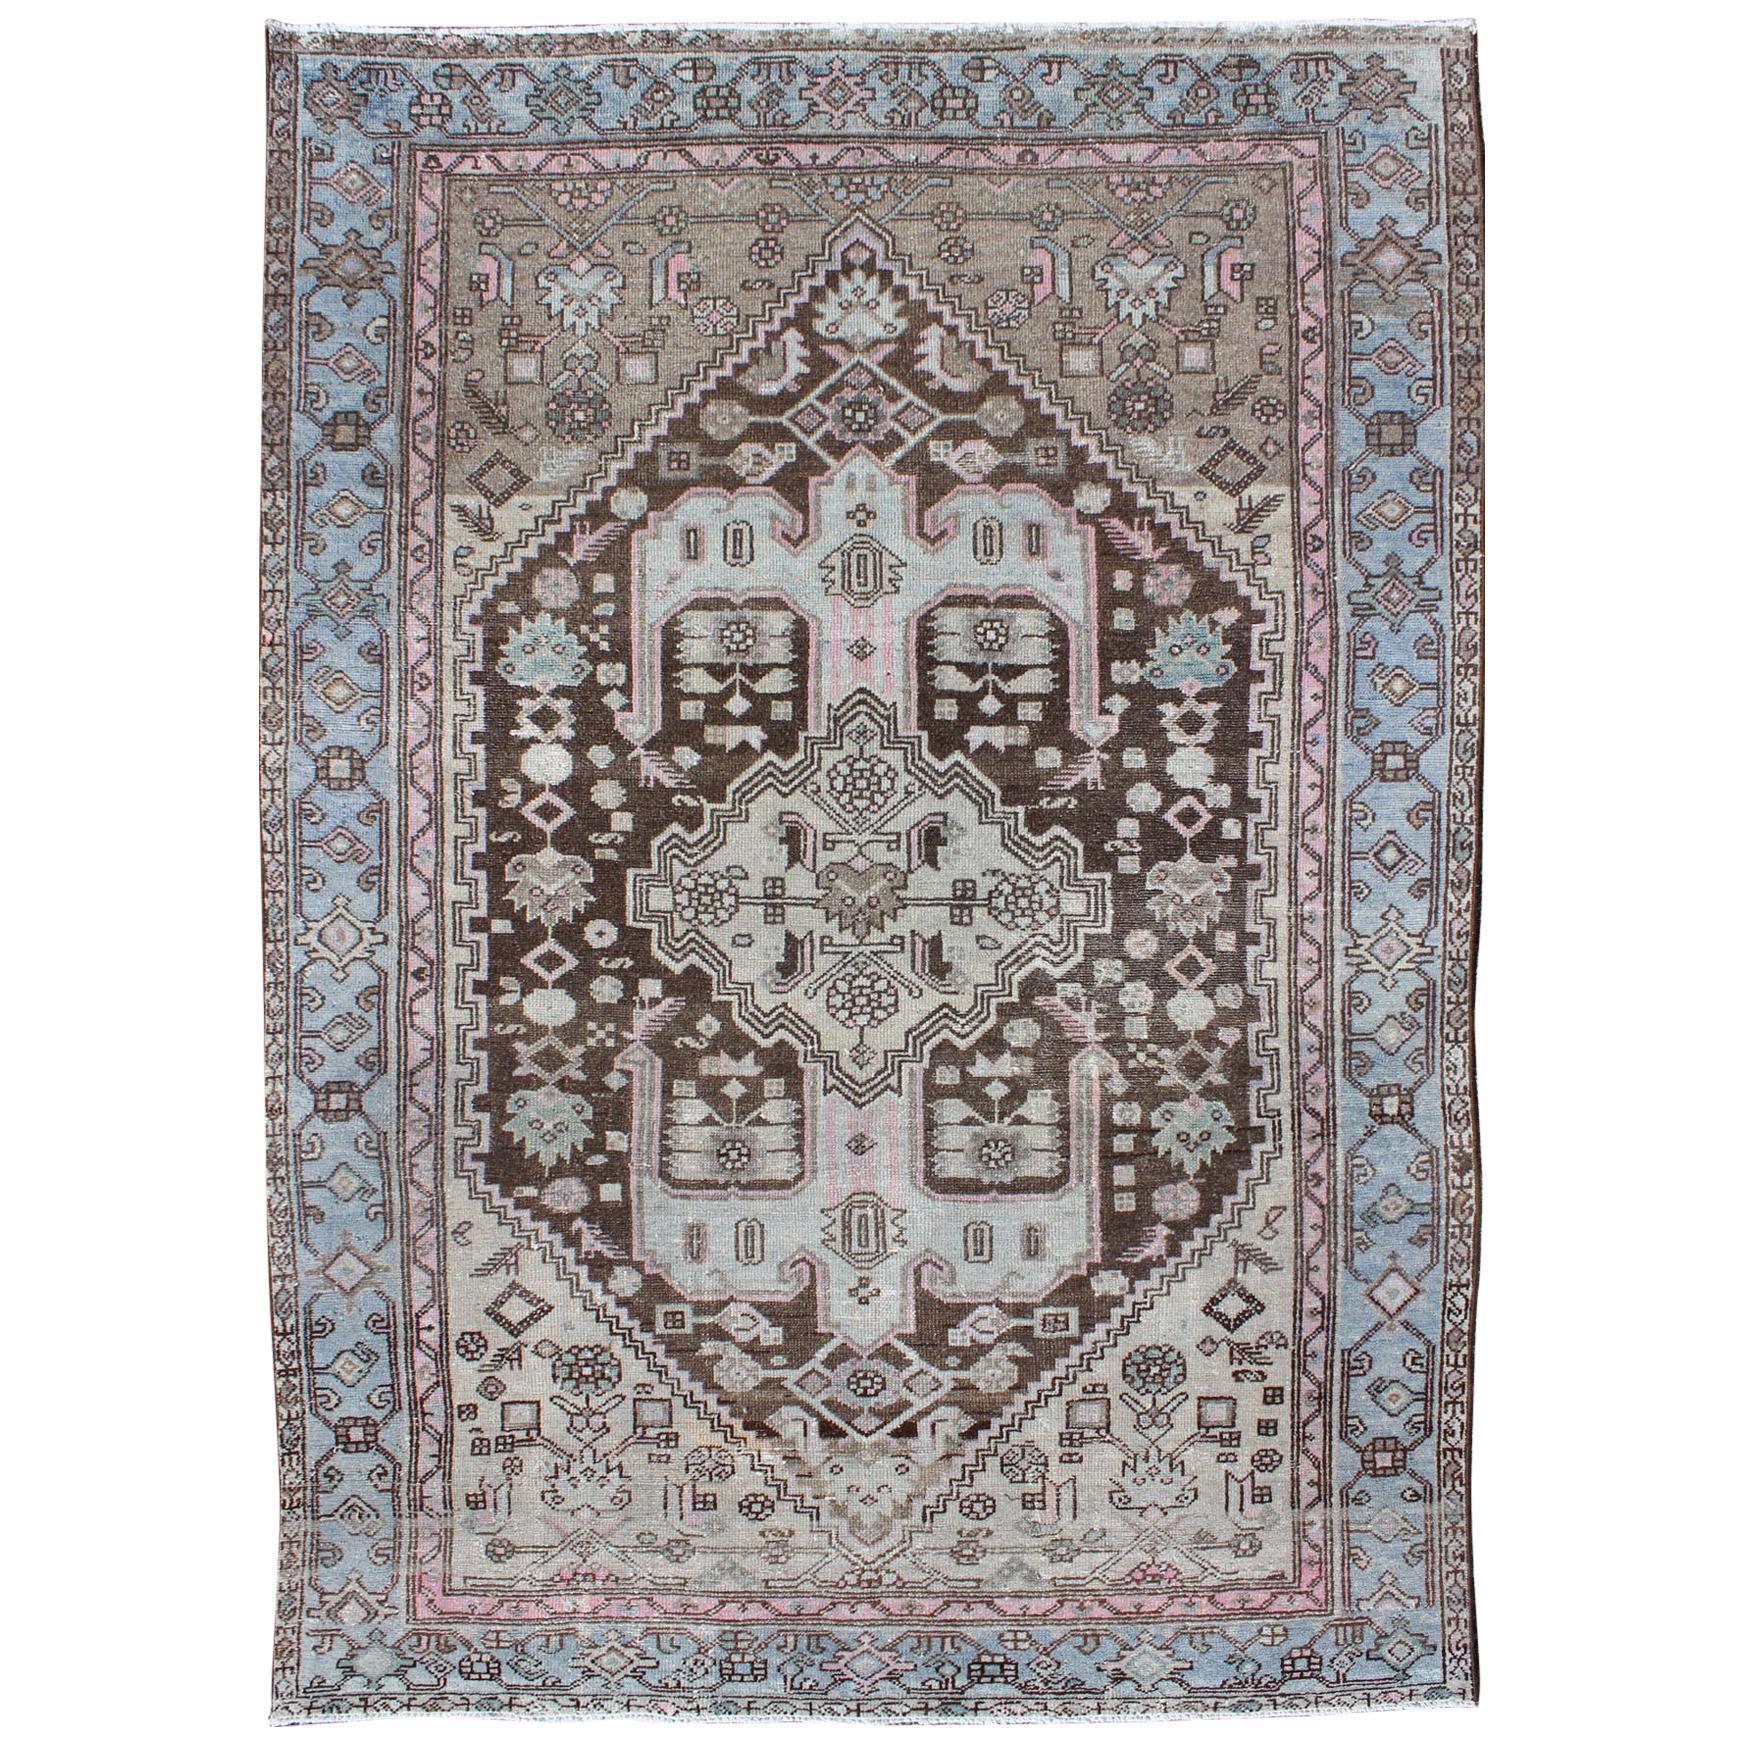 Antique Persian Hamedan Rug with Geometric Medallion in Blue, Pink, Chocolate